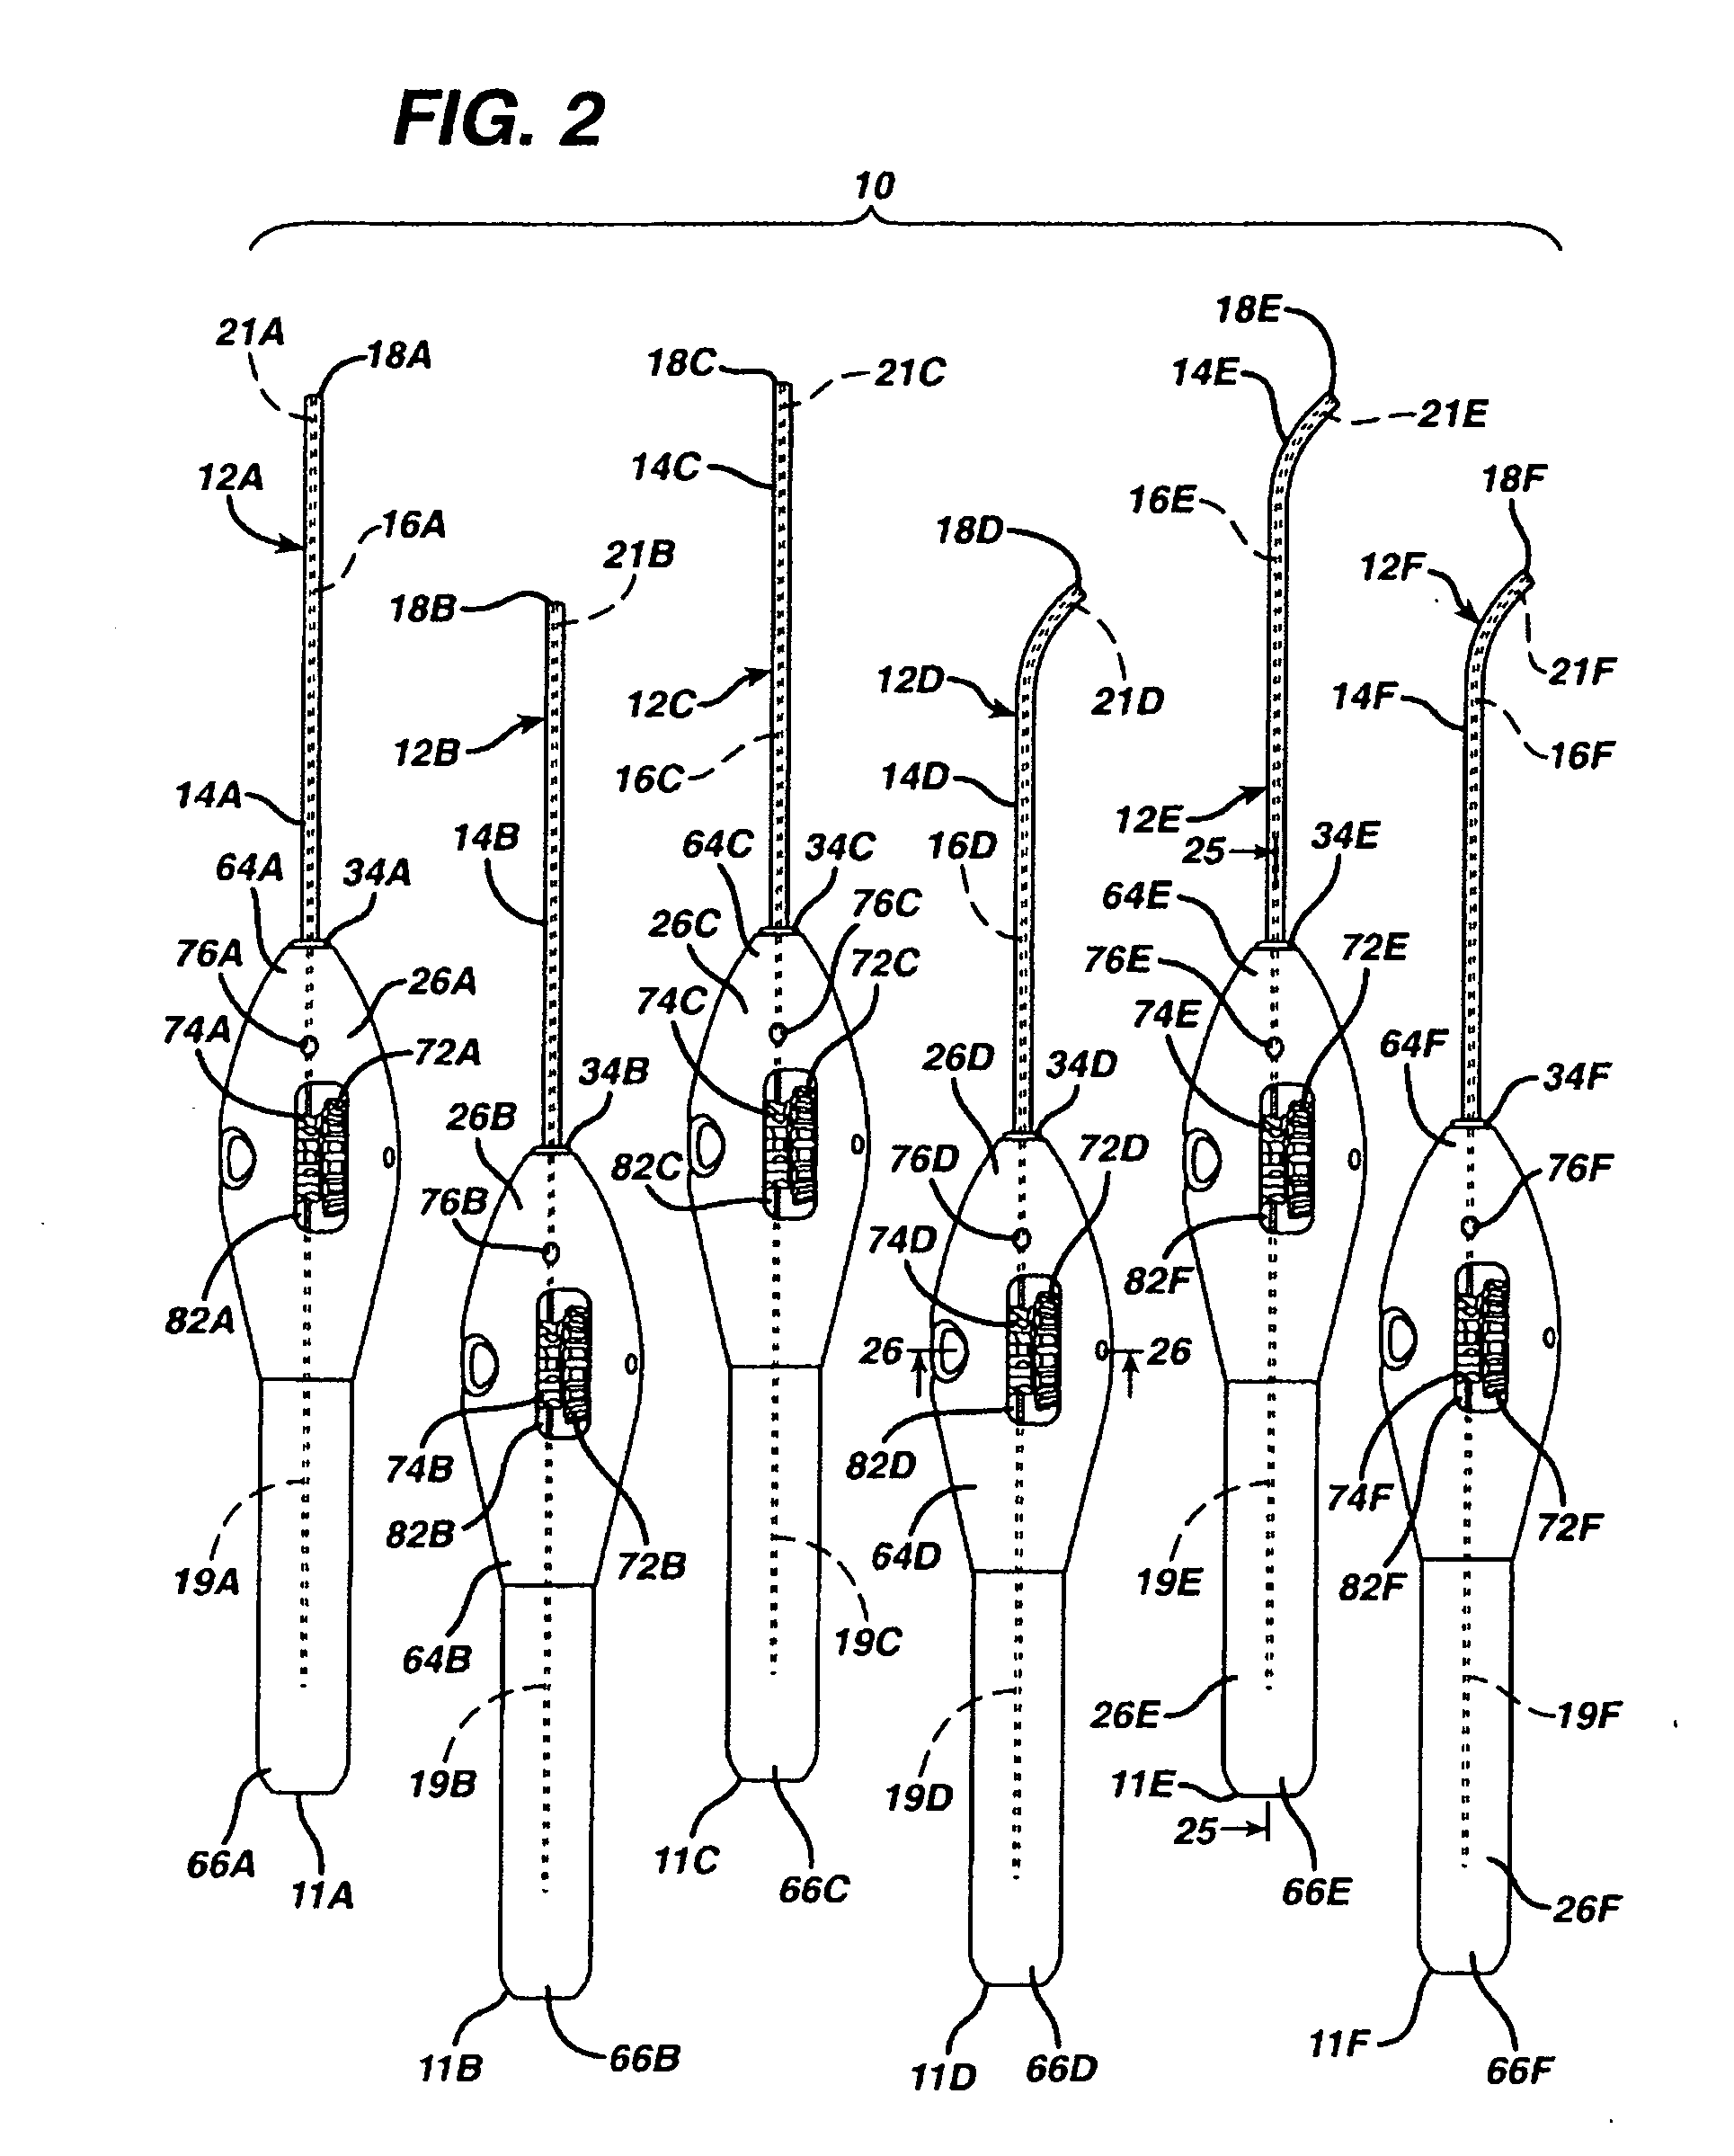 Implant system with sizing templates